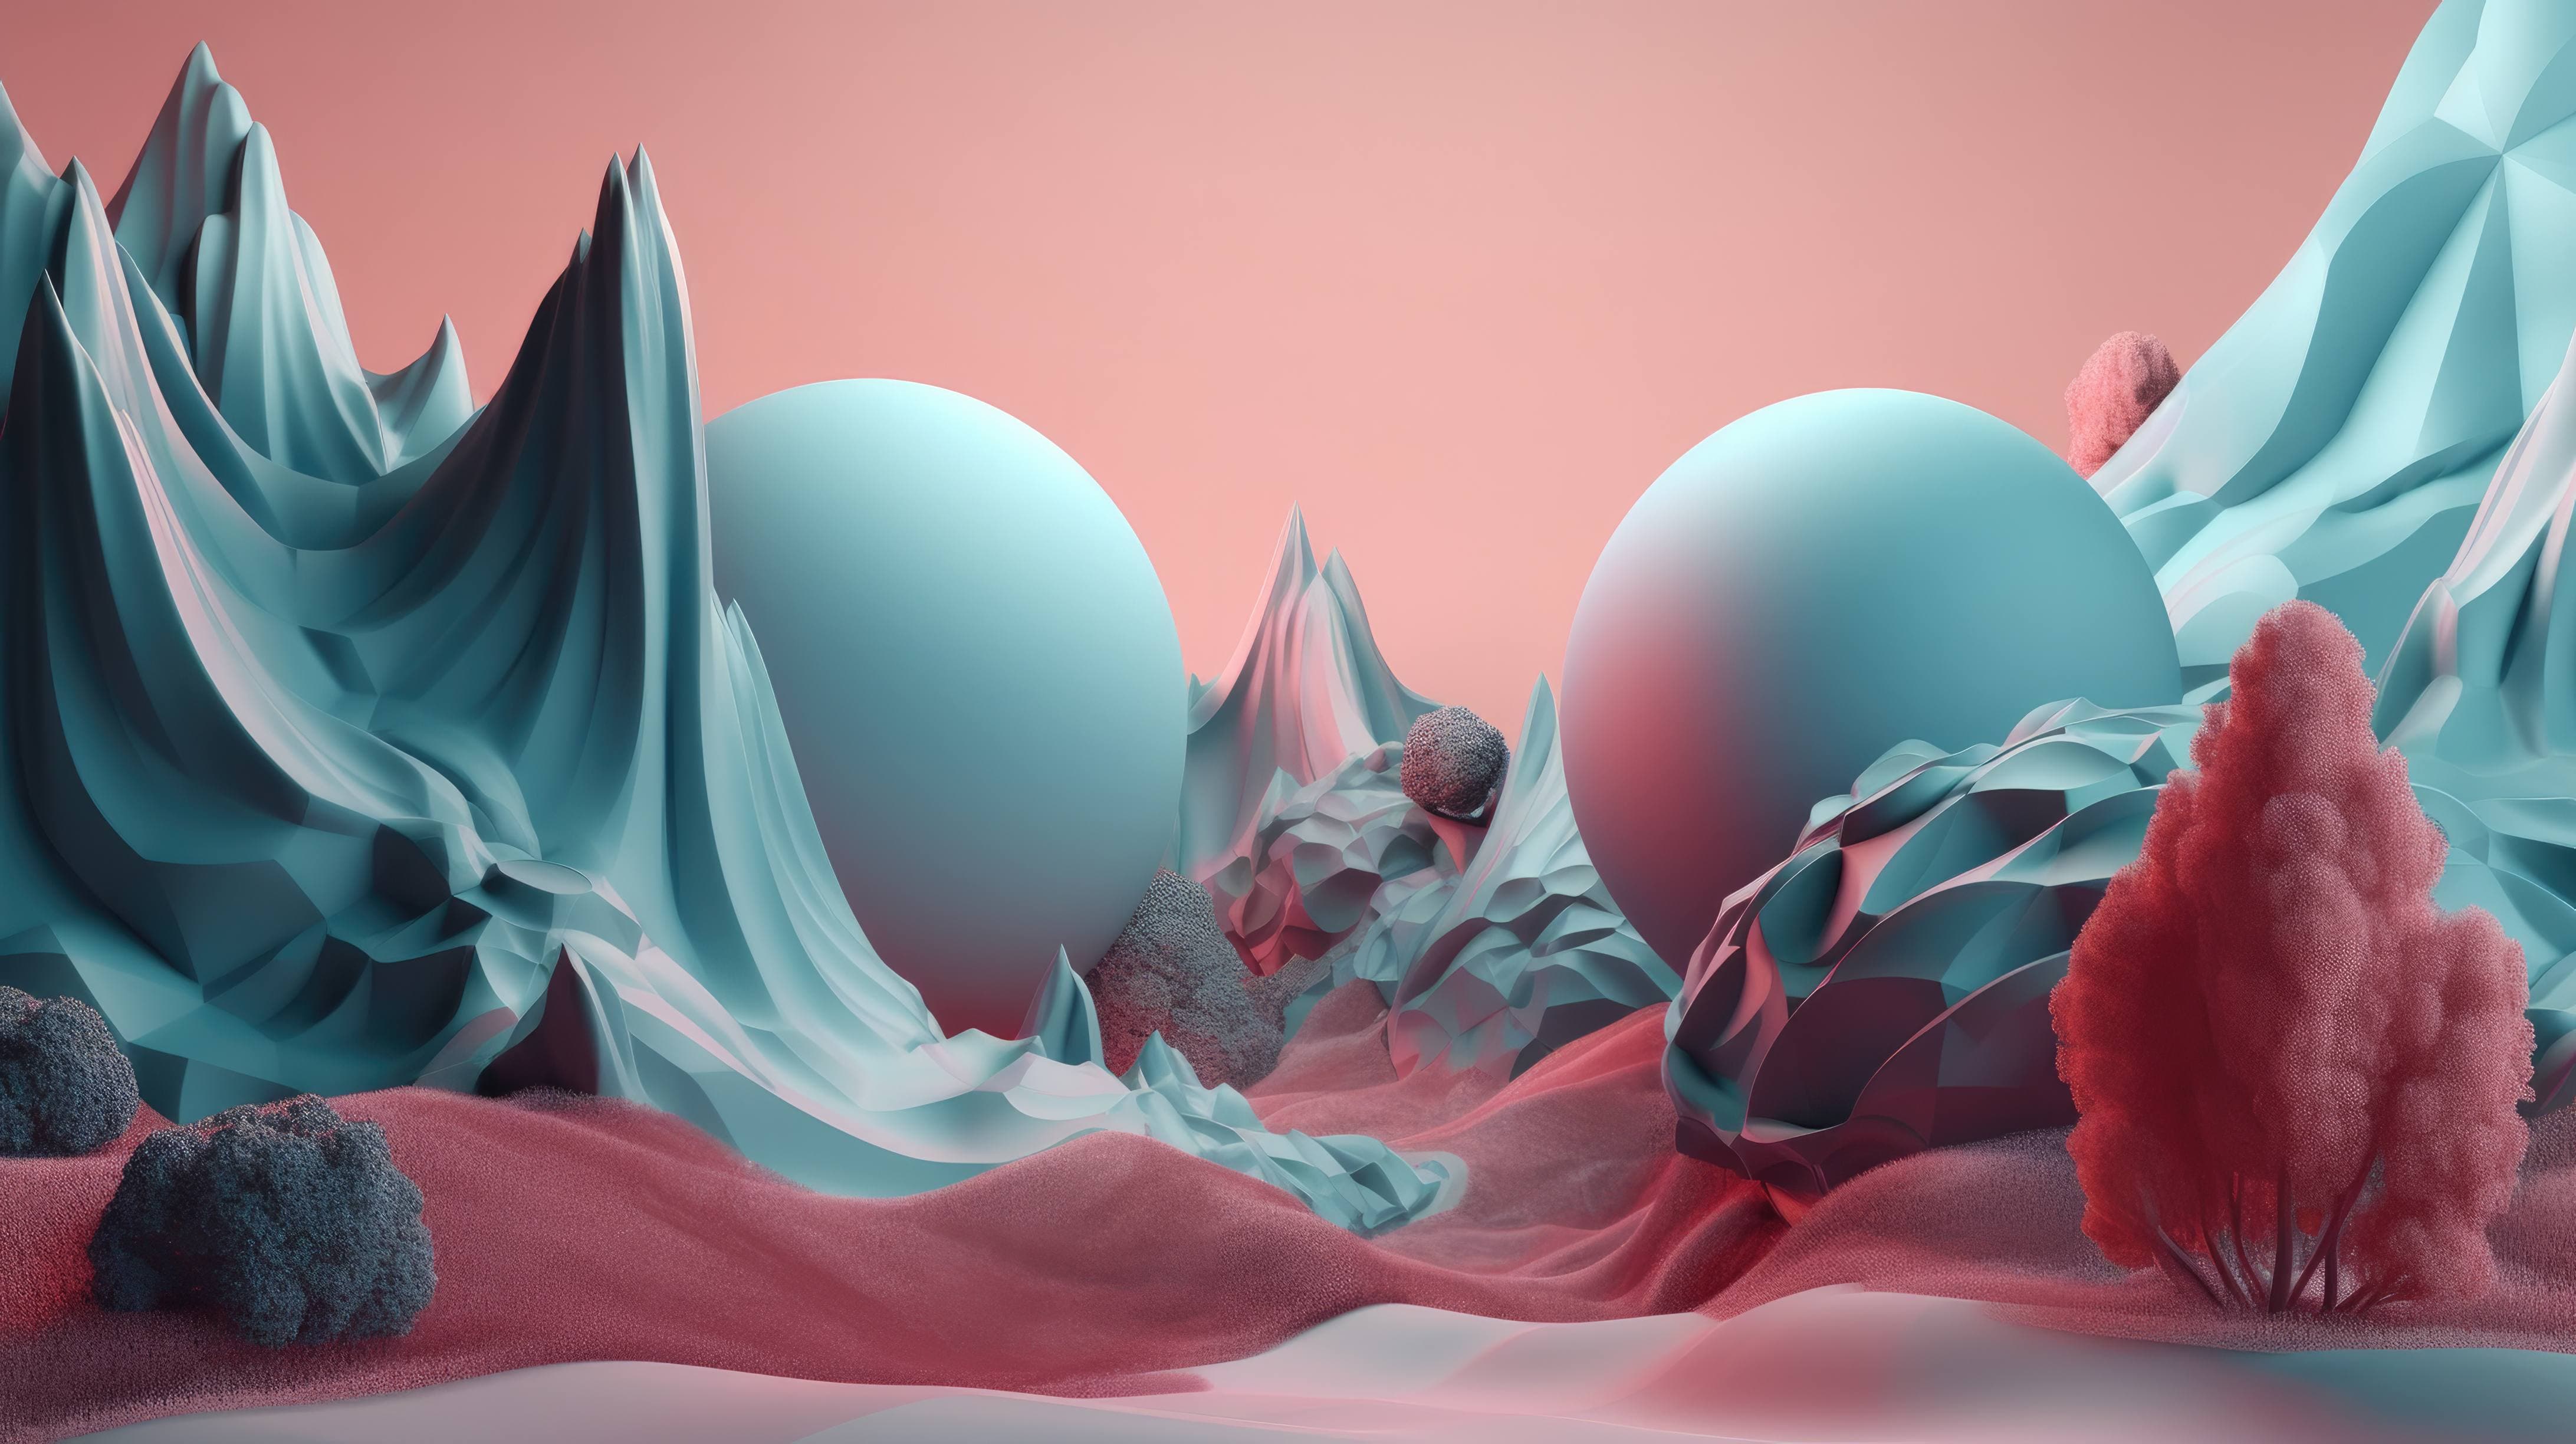 This 3D abstract landscape features a